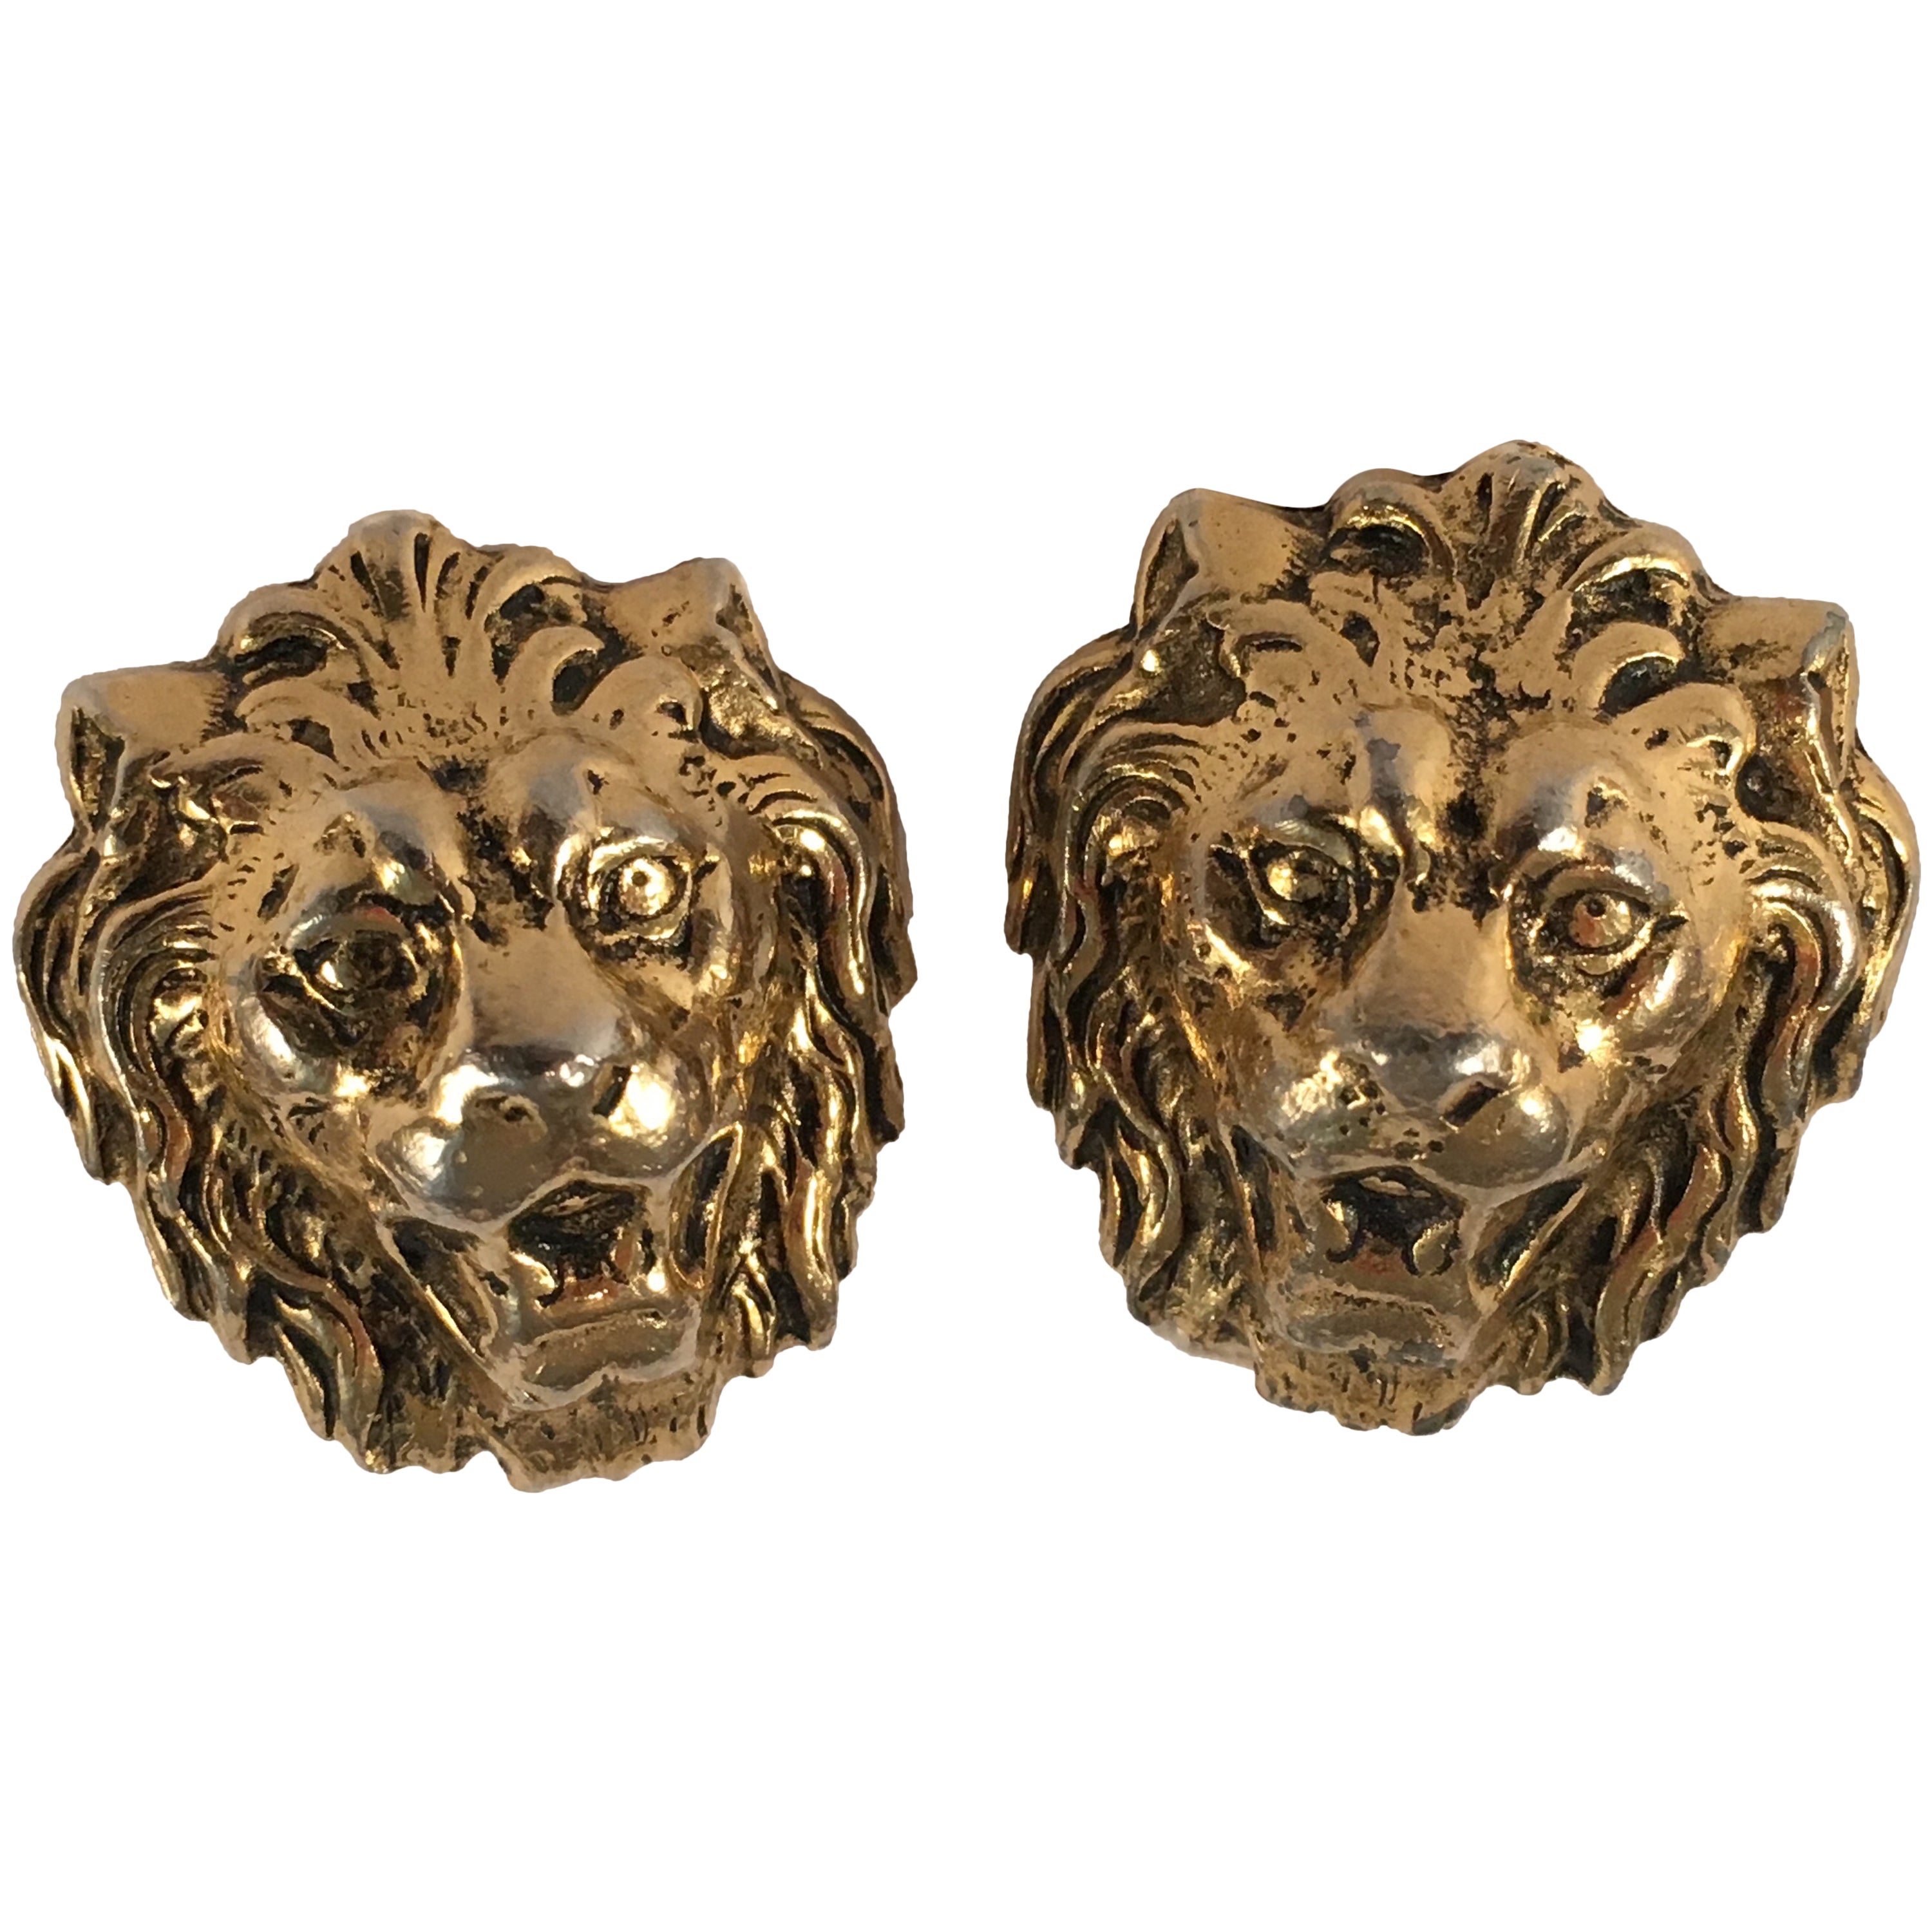 Gucci Lion Earrings - 2 For Sale on 1stDibs